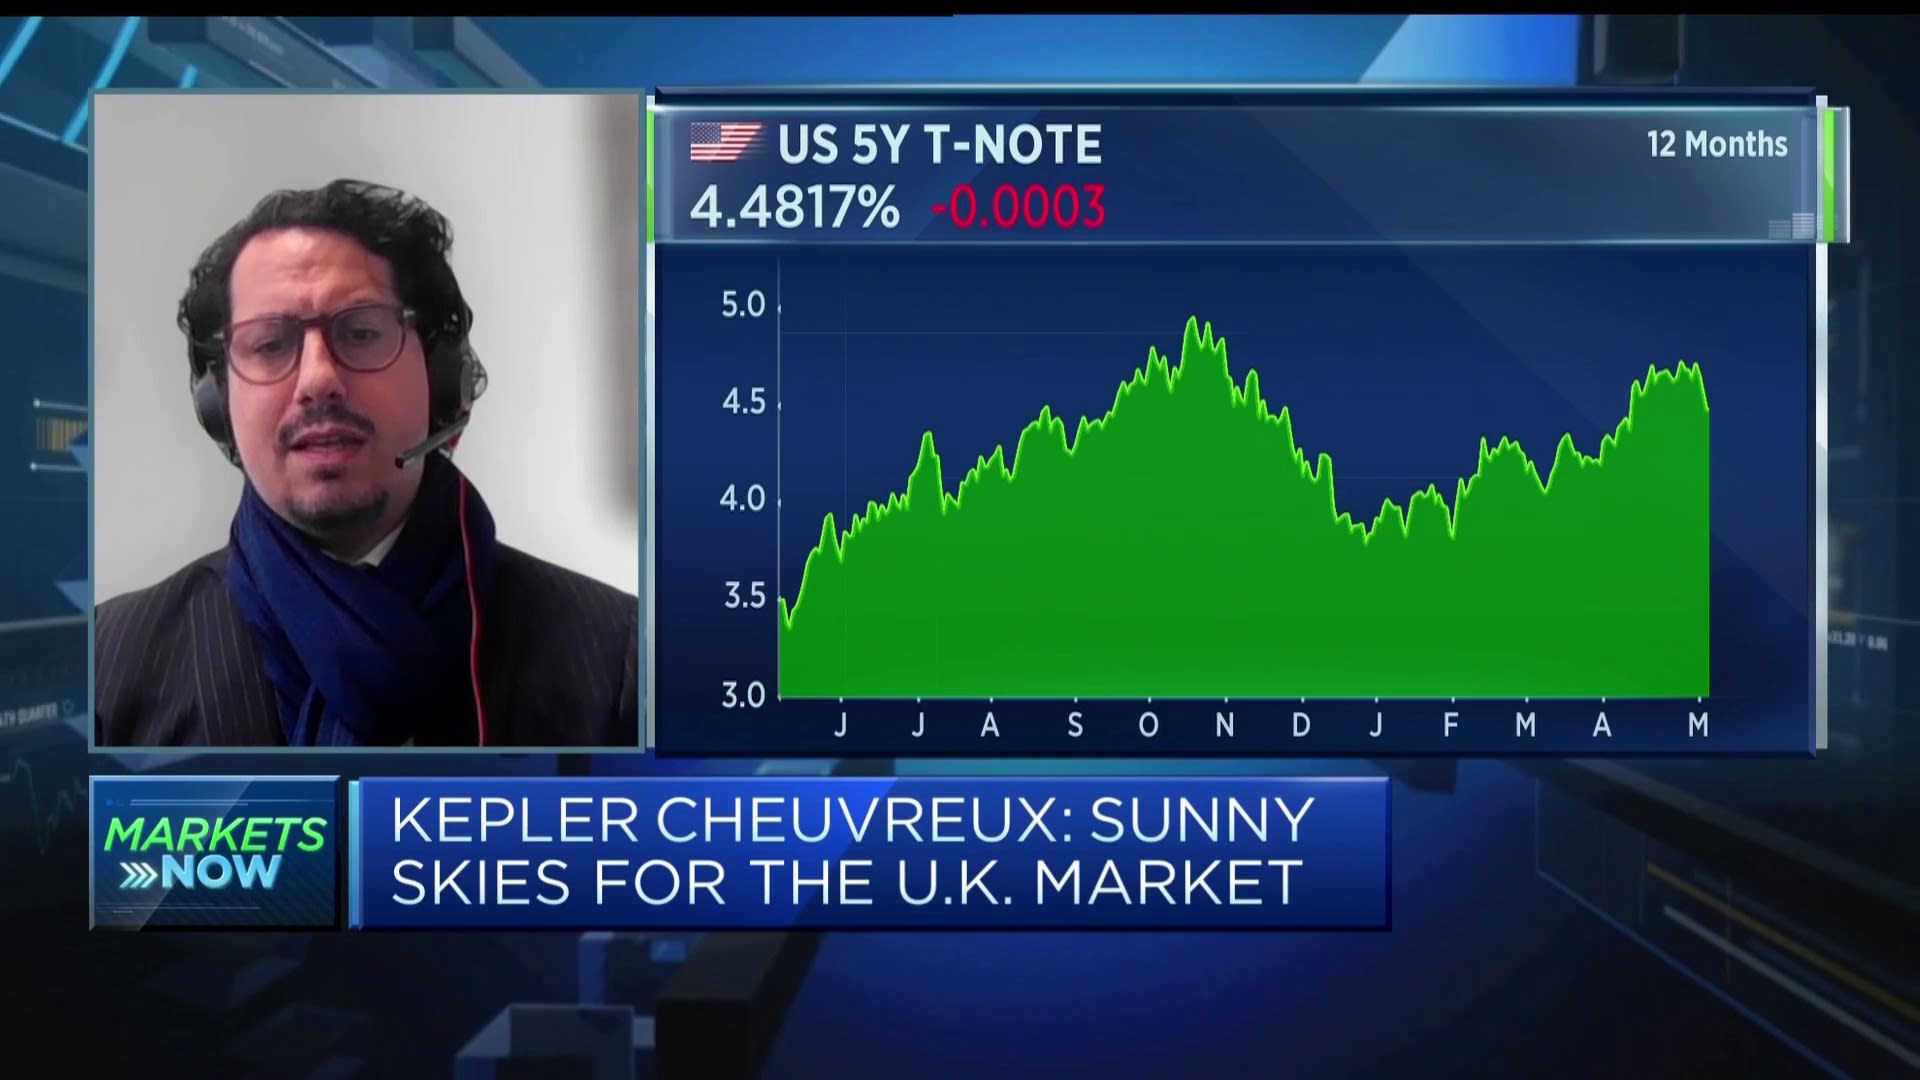 Kepler Cheuvreux: Some U.S. data is indicating a slowdown [Video]